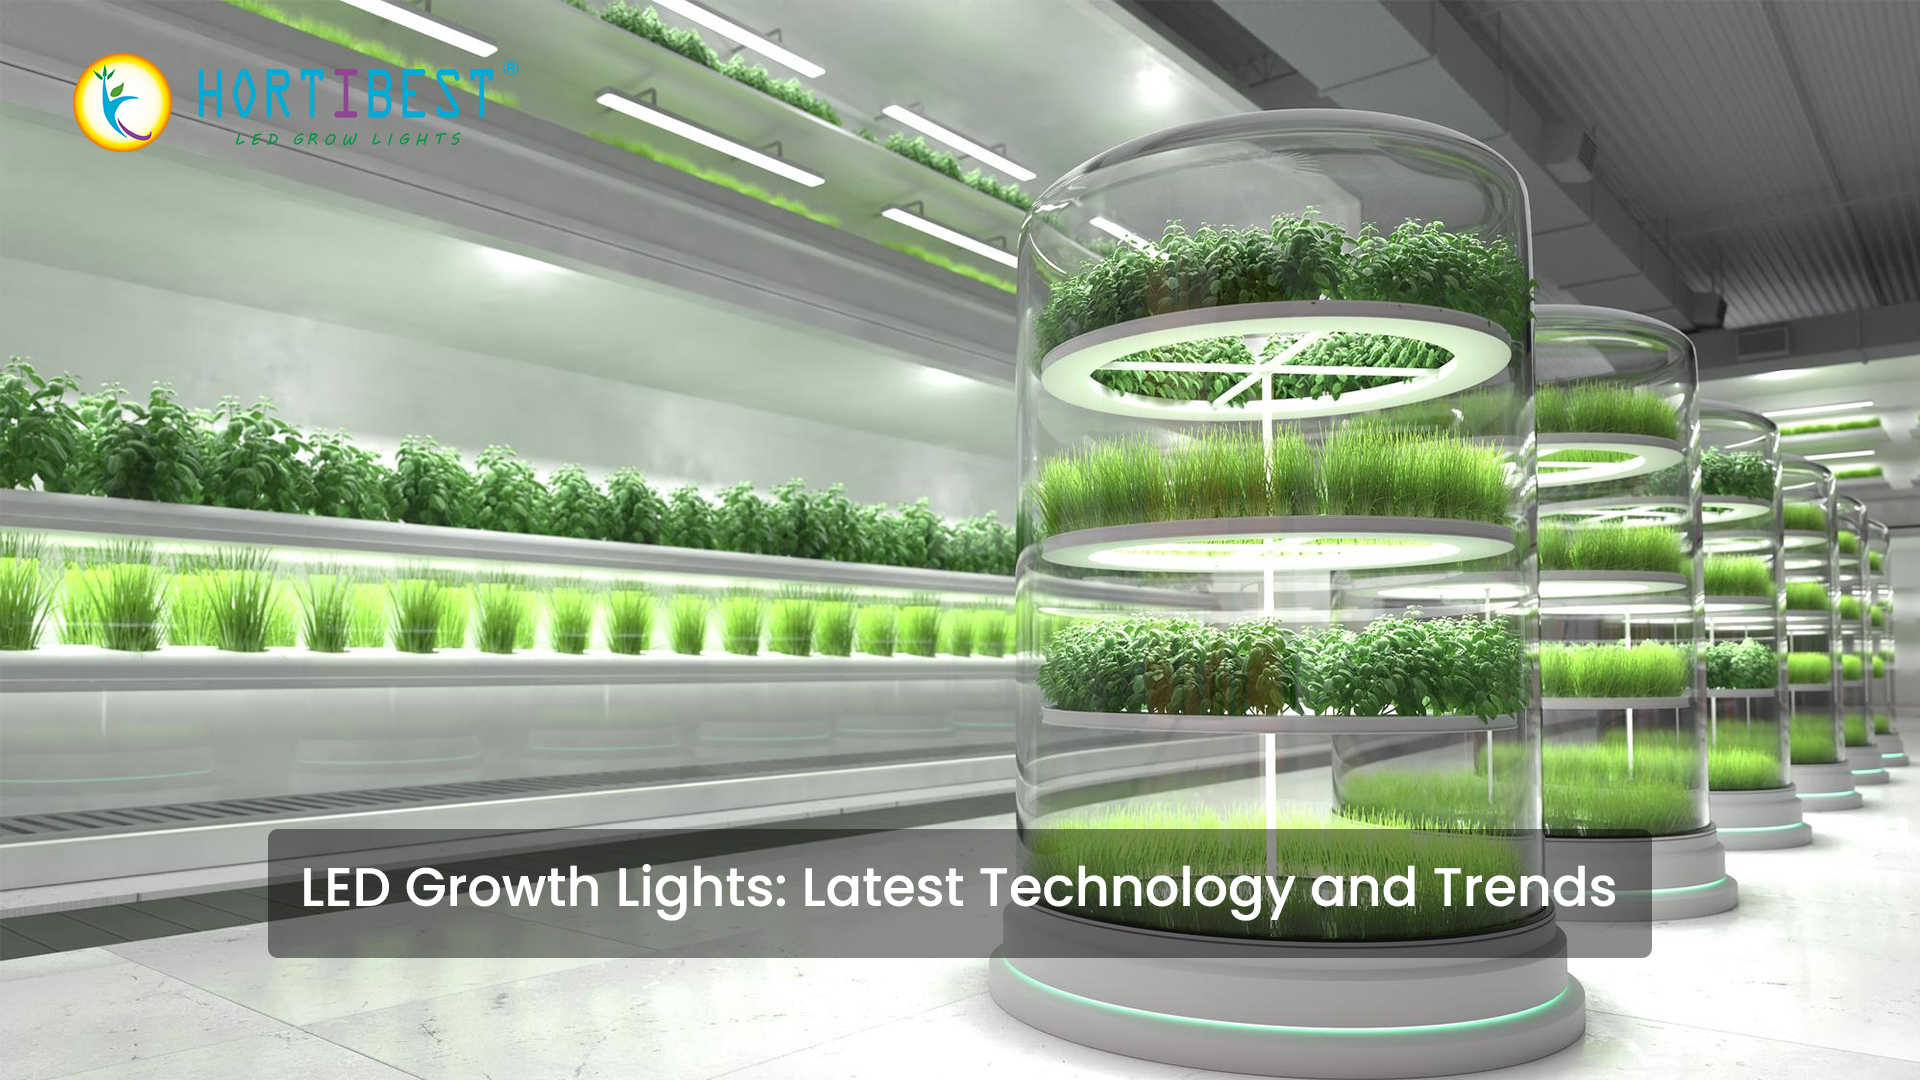 LED Growth Lights: Latest Technology and Trends